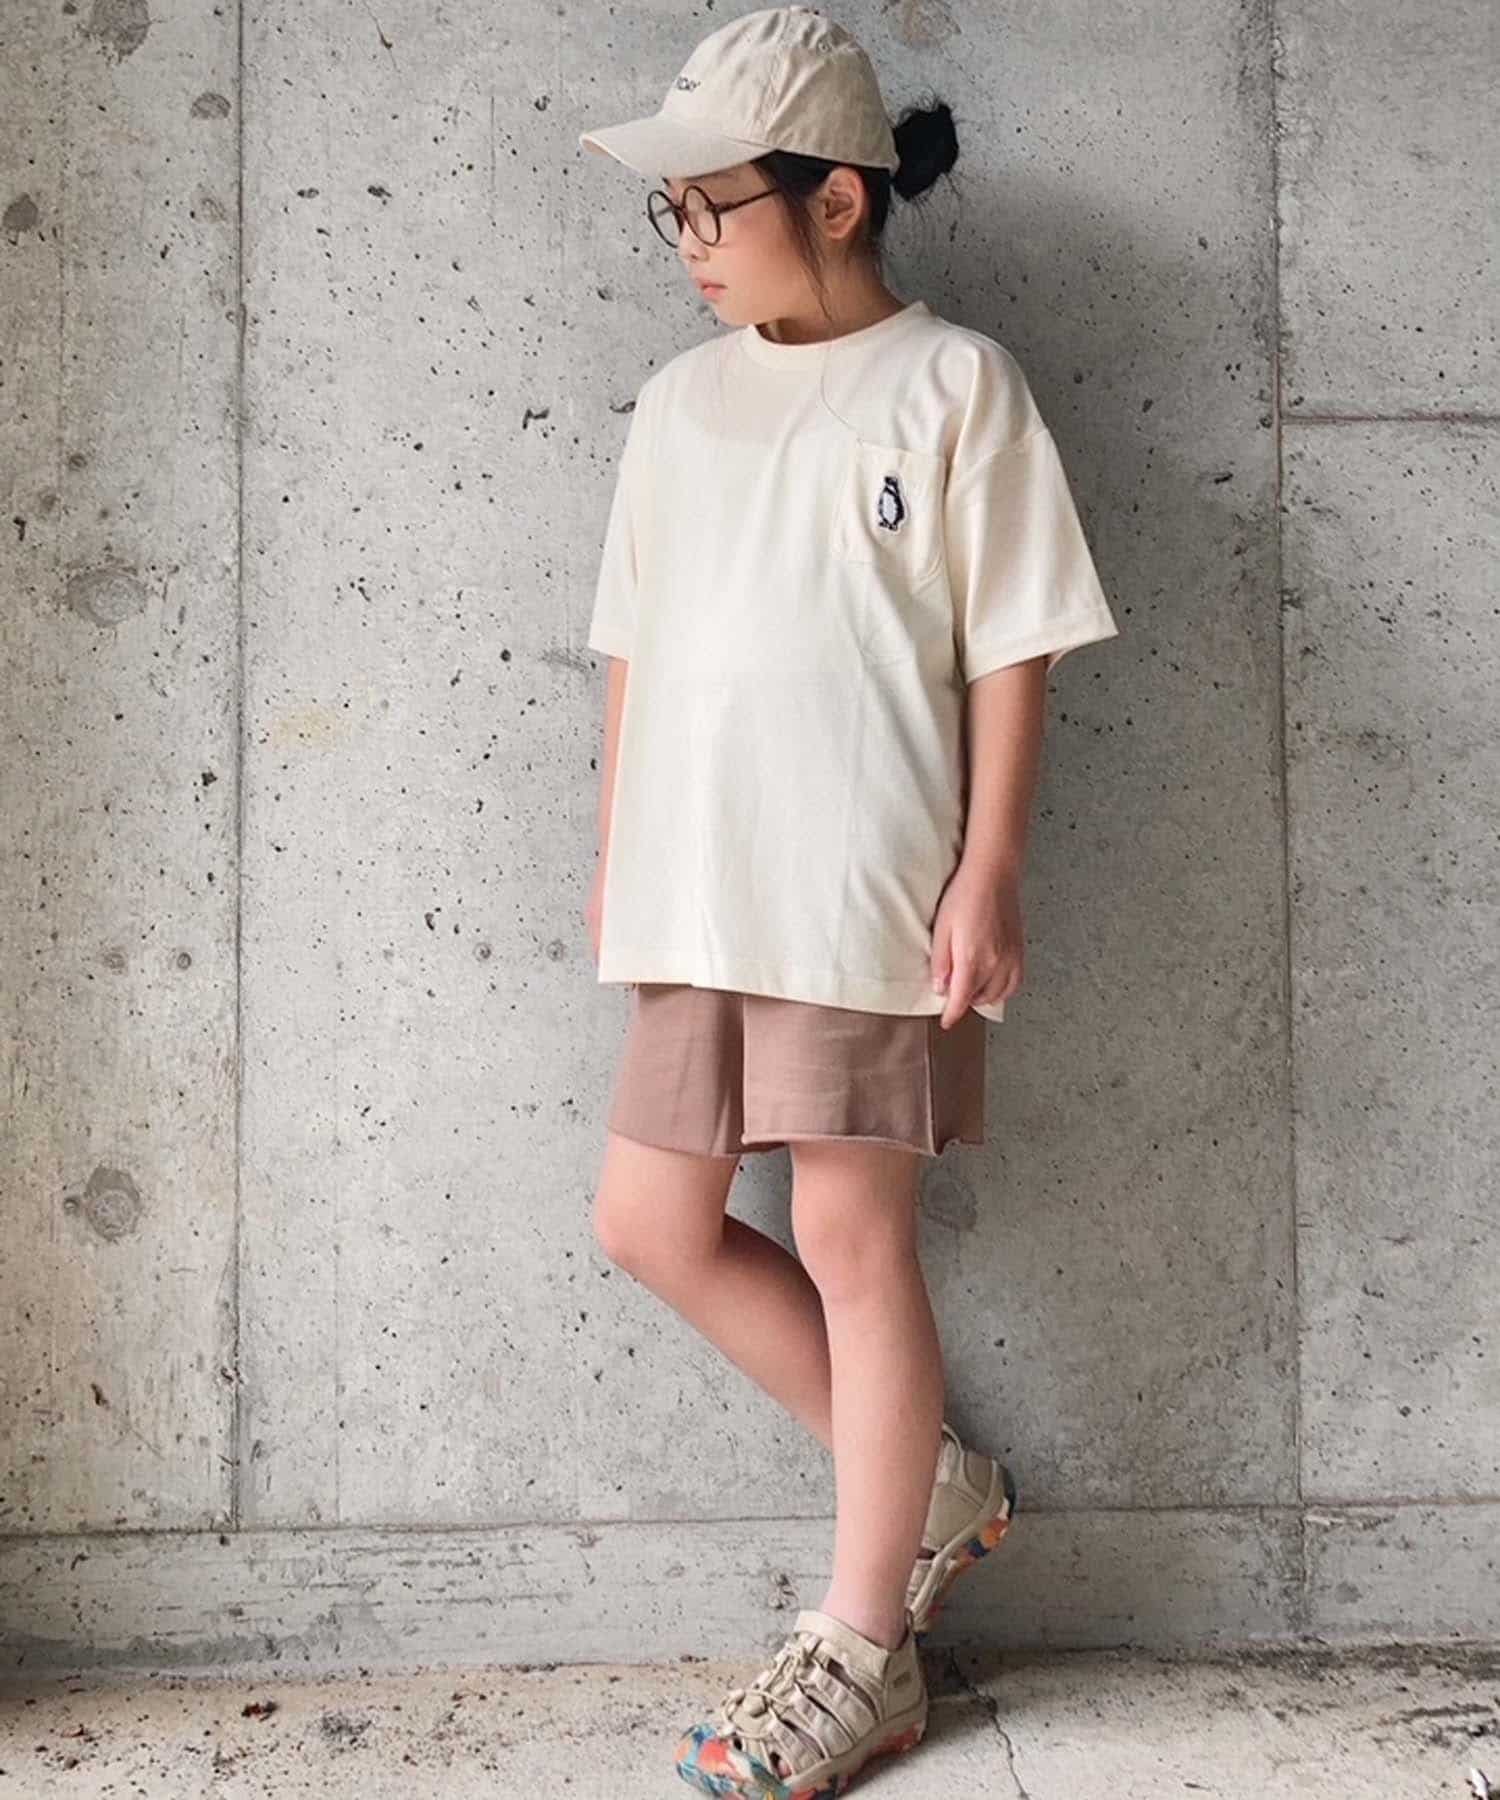 OUTLET(アウトレット) 【CIAOPANIC TYPY】【KIDS】サガラ刺繍接触冷感Tee